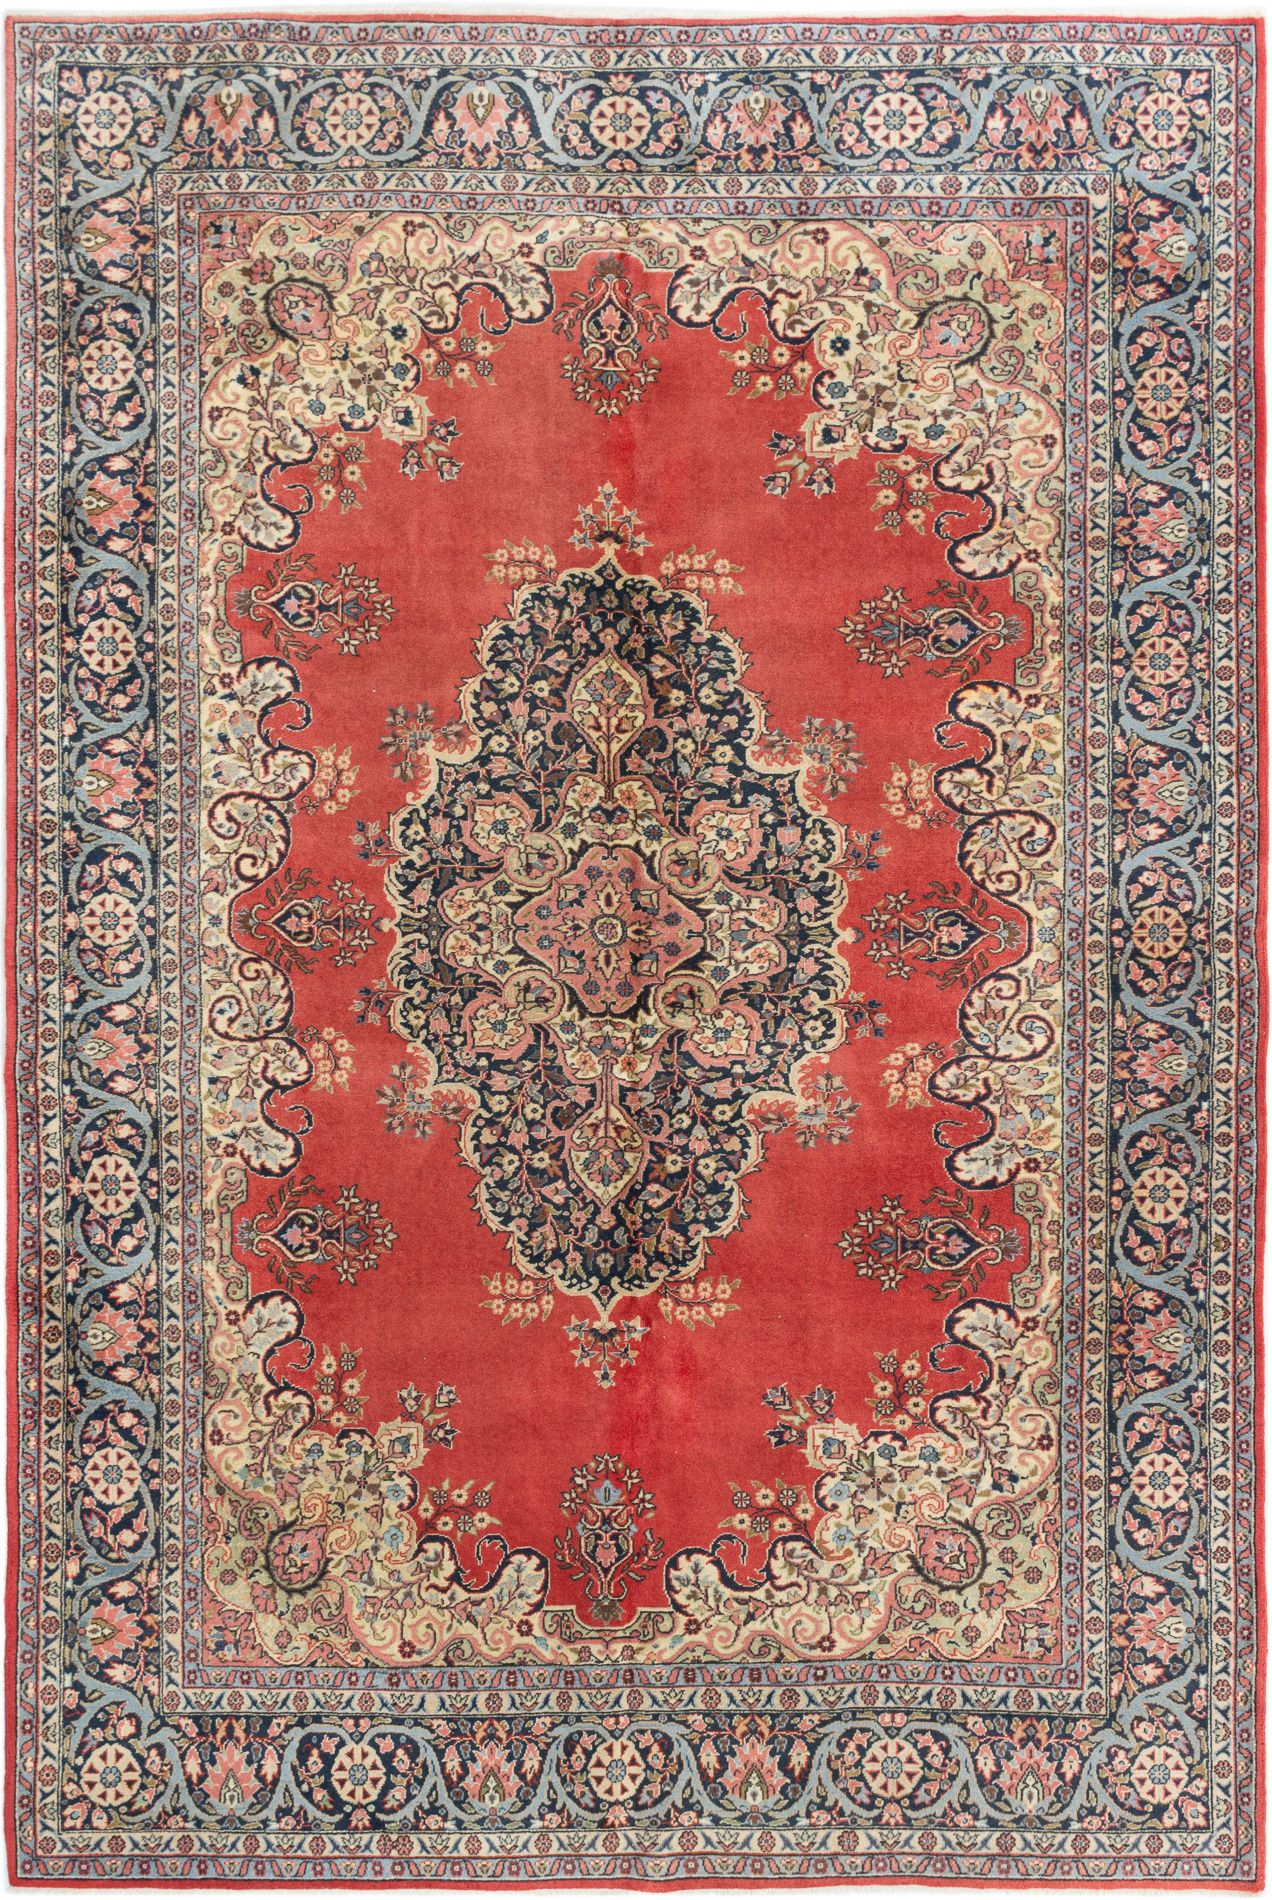 Hand-knotted Anatolian Dark Copper Wool Rug 6'11" x 10'4" Size: 6'11" x 10'4"  